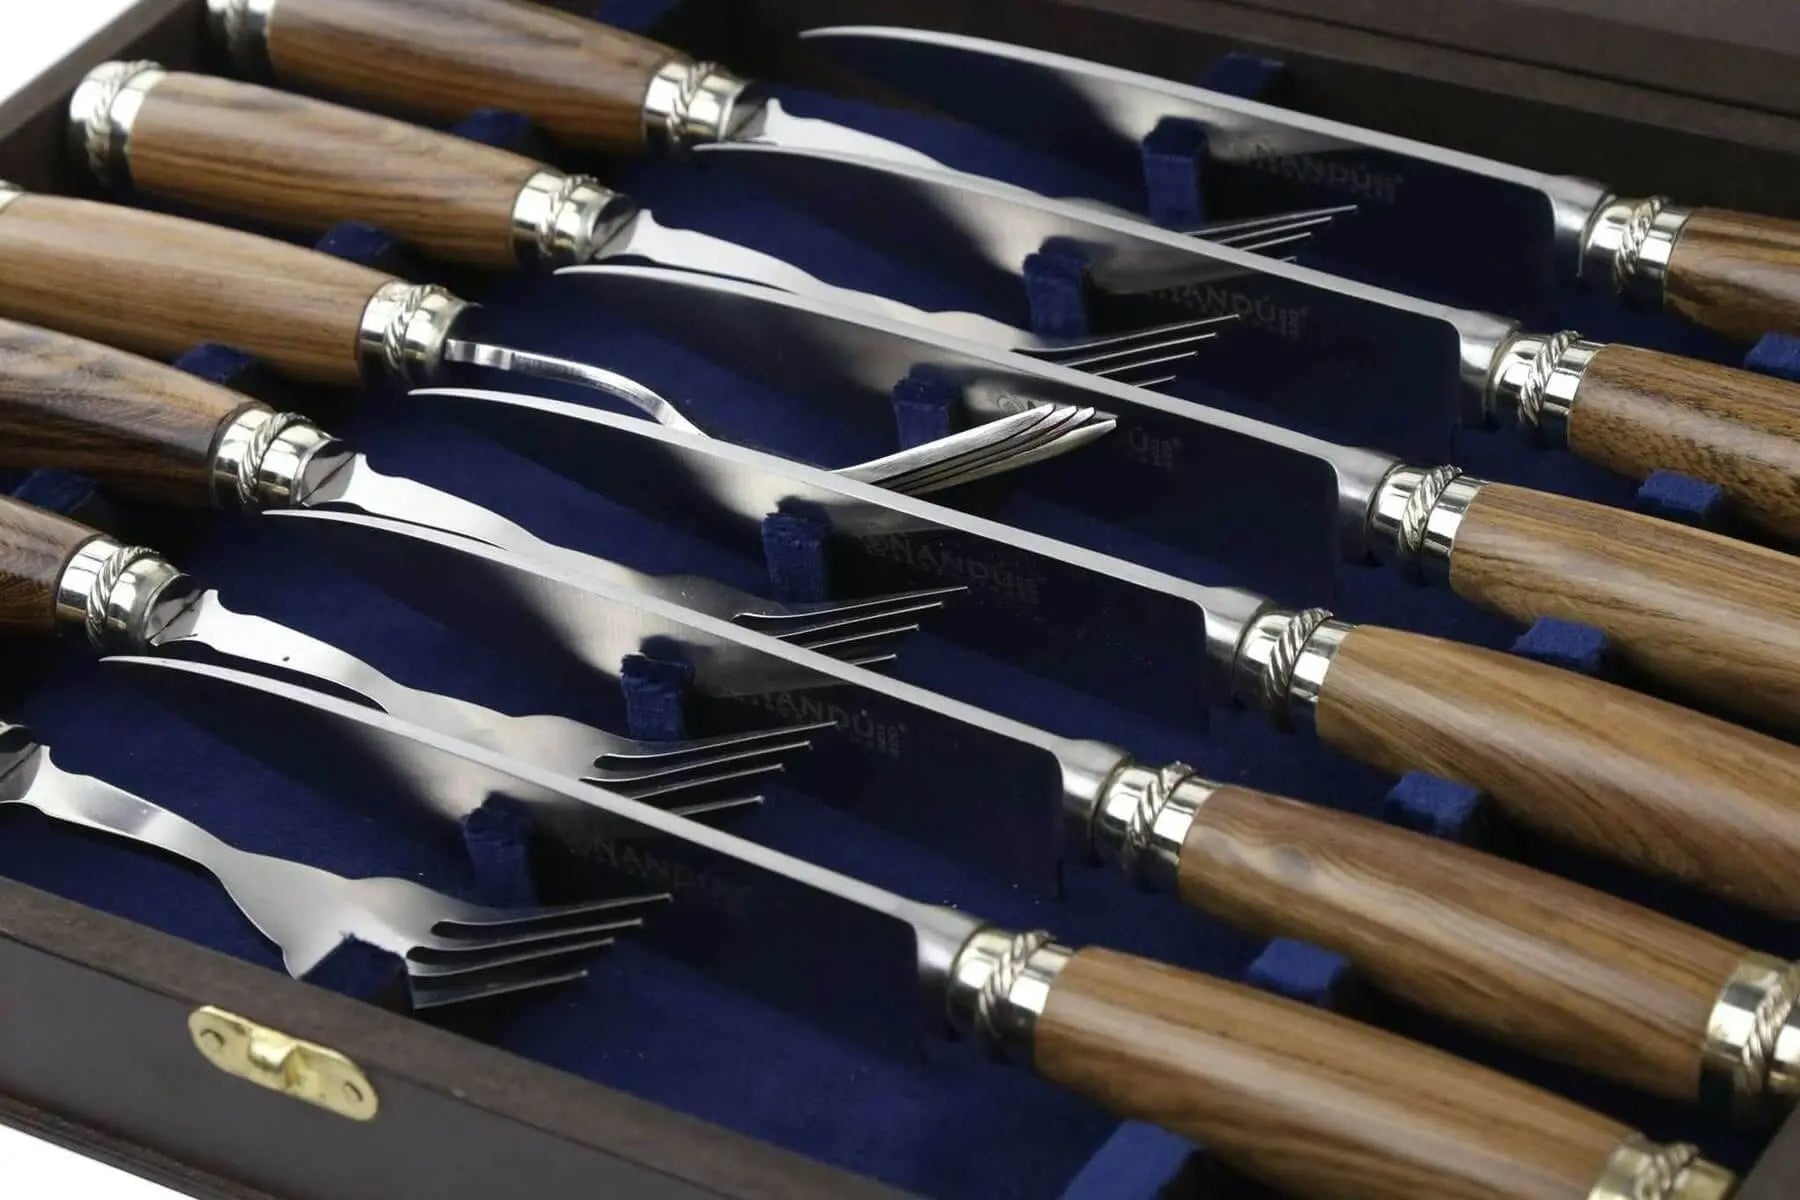 Steak Cutlery set with guayubira wood handles, stainless steel blades and wooden case